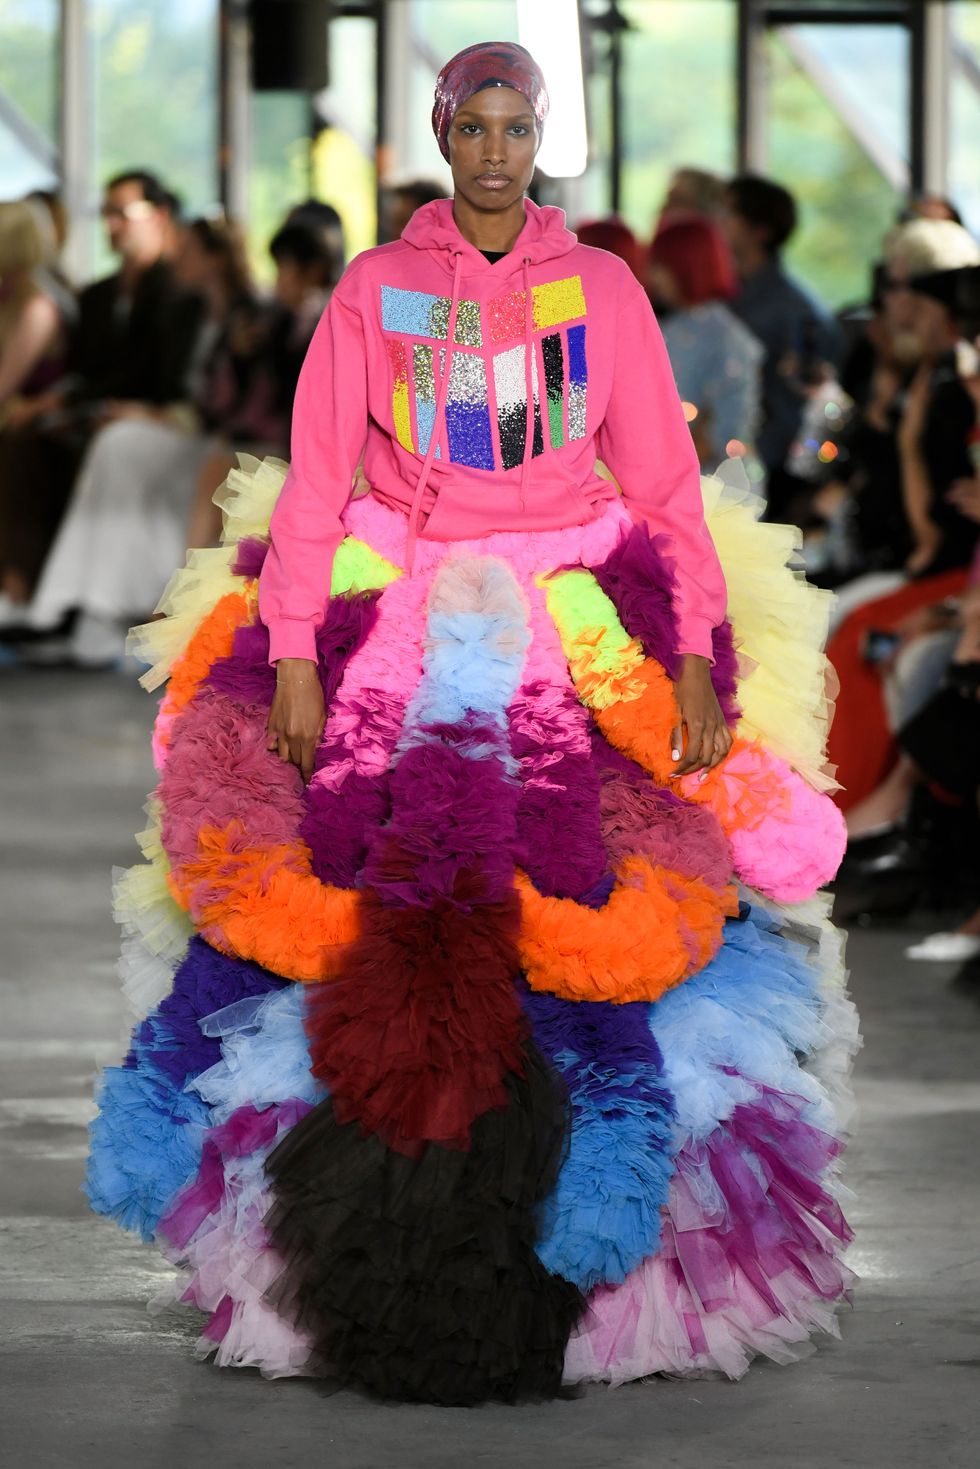 The Extreme Clothes Trend: Unhinged, Maximalist Fashion Is Back